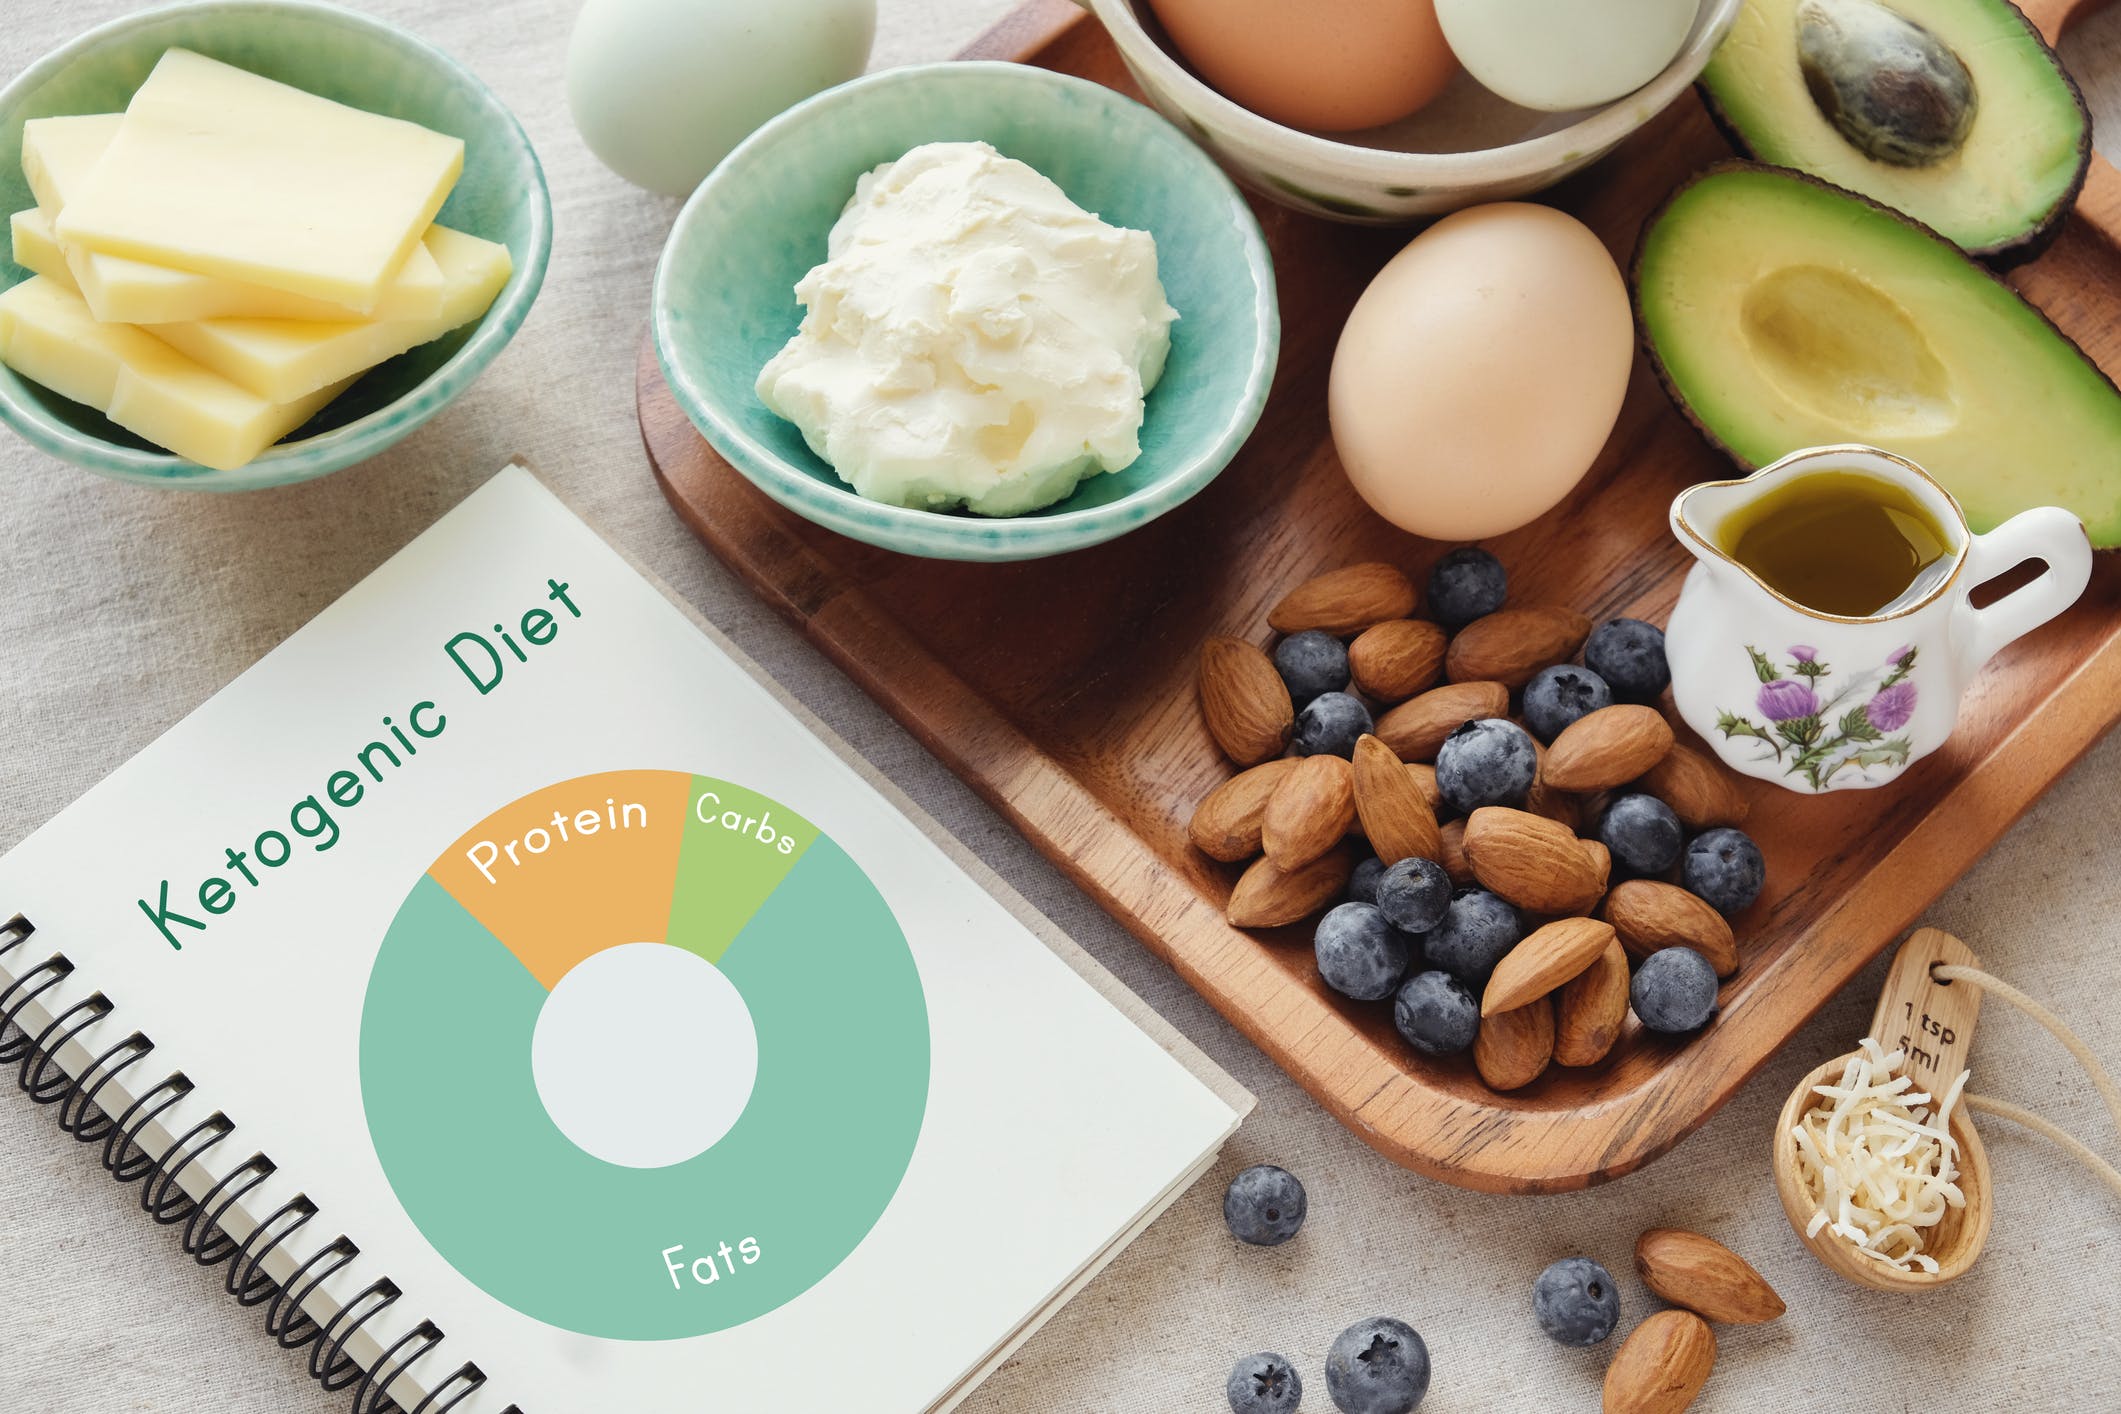 Ketogenic Diet: Is It Safe and Sustainable?